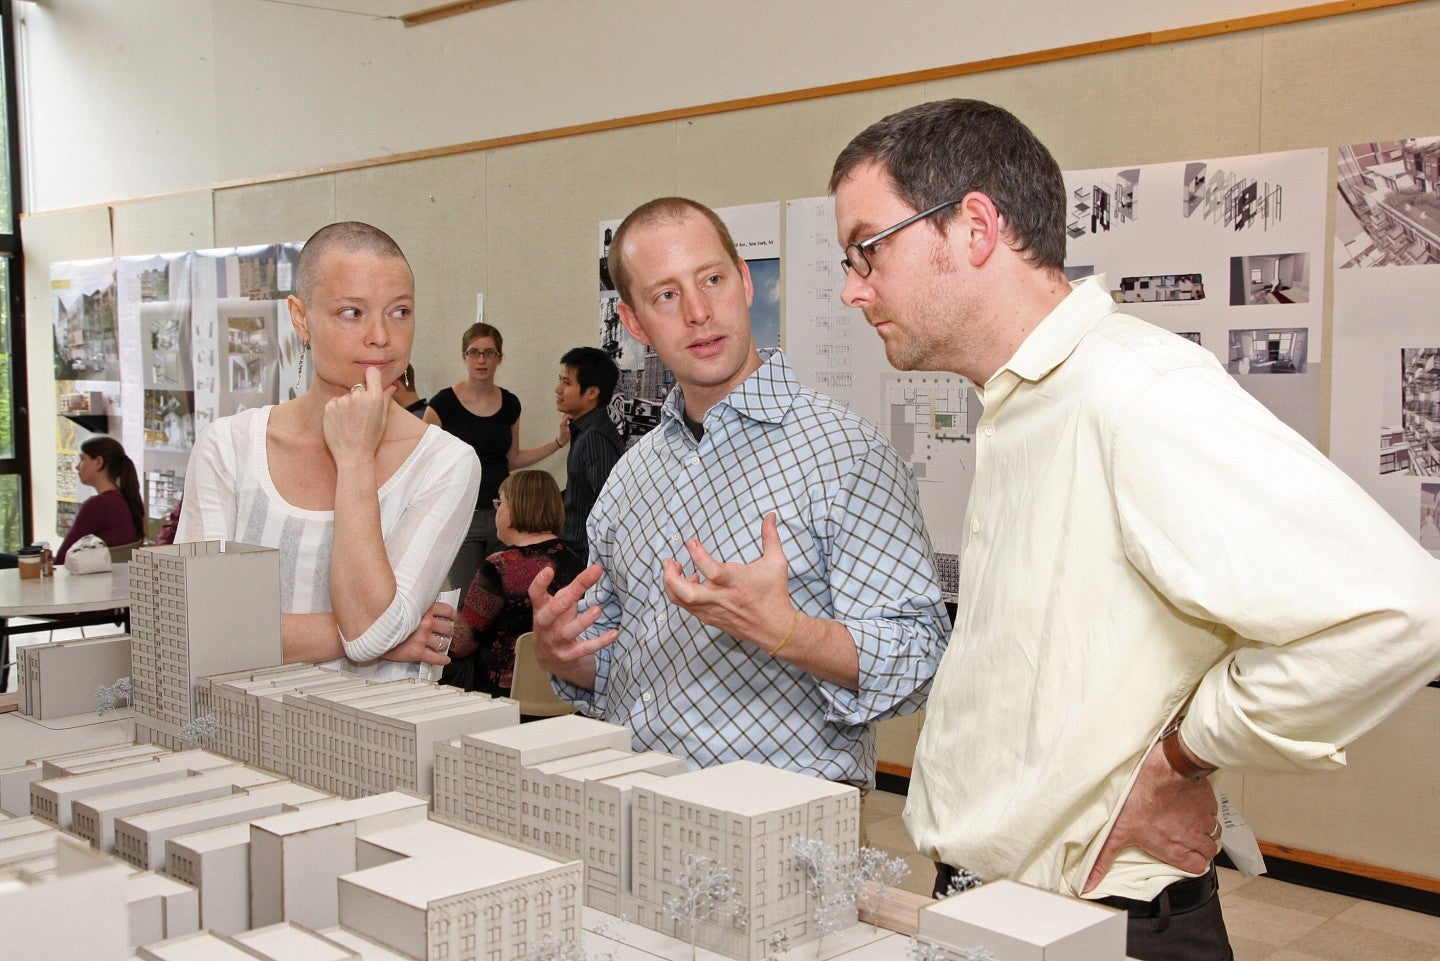 Faculty and students reviewing architectural designs and building models